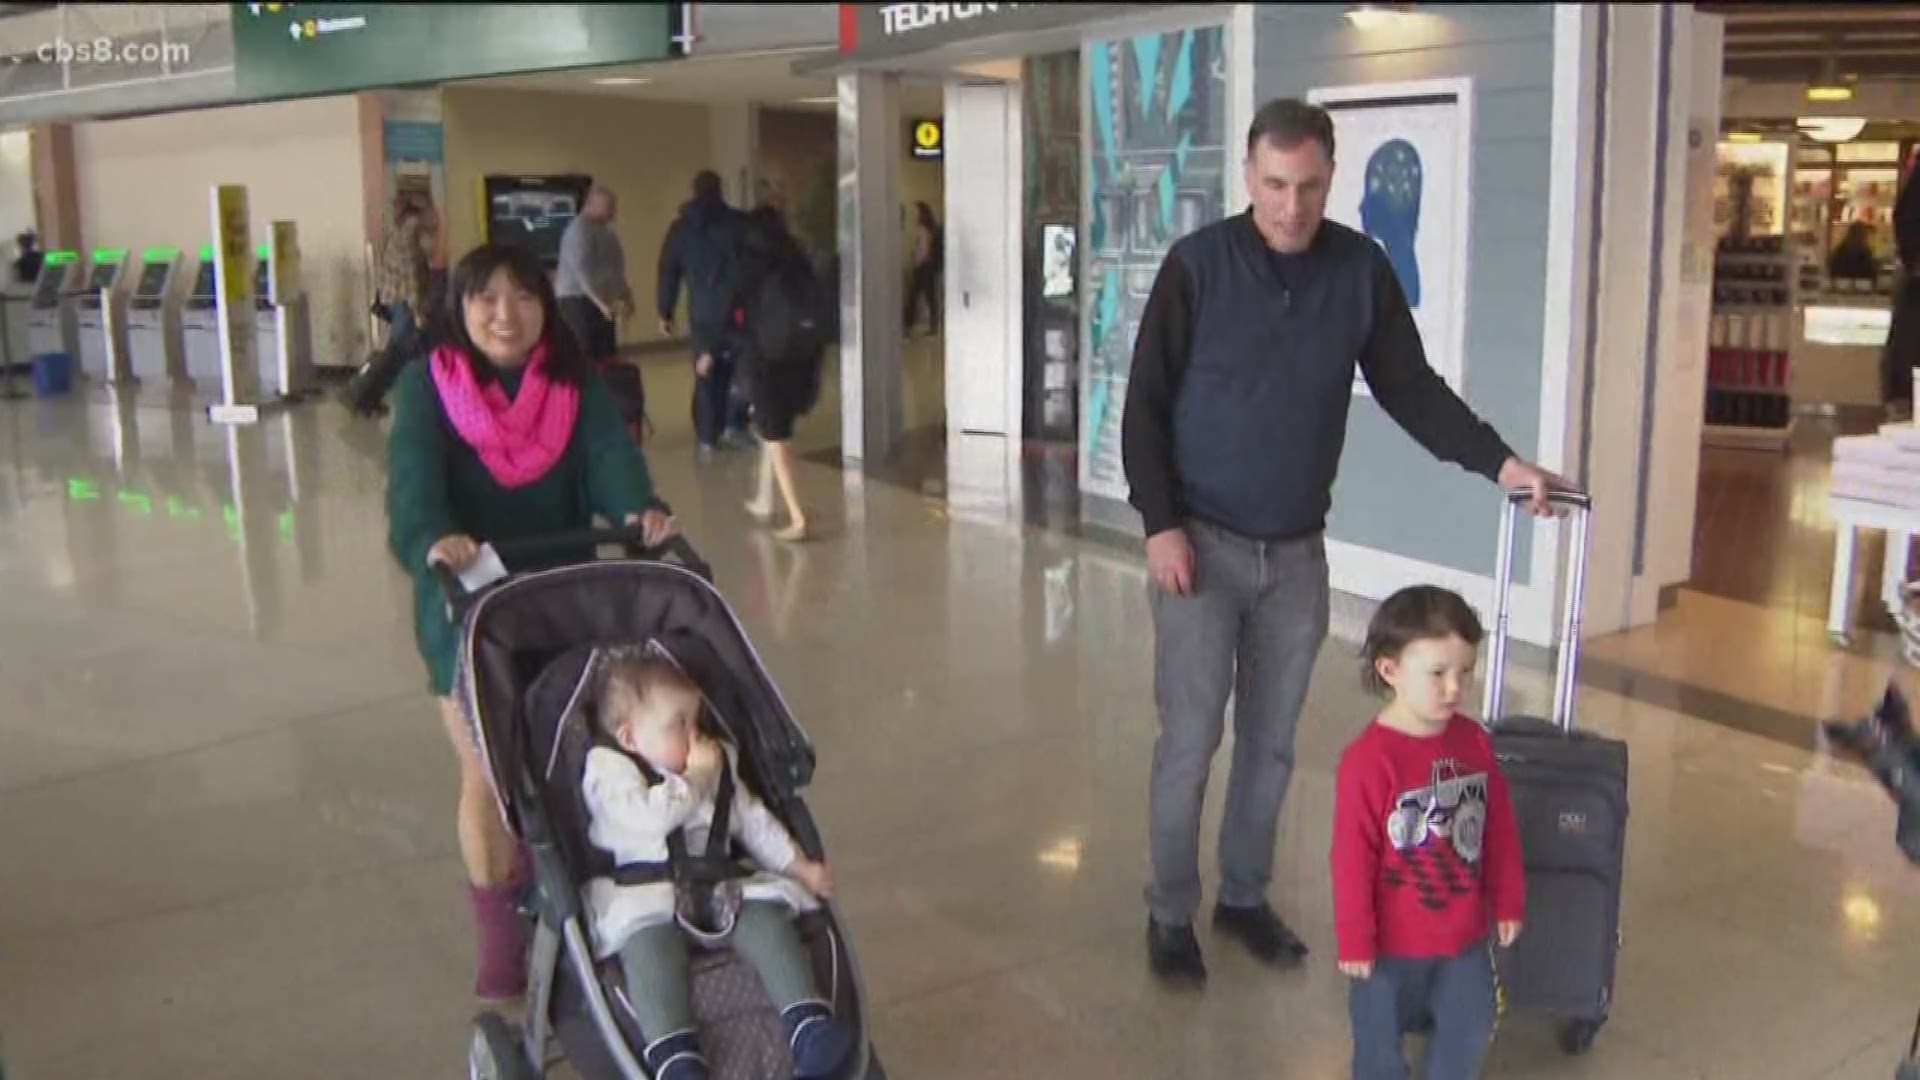 Among those cleared to leave Travis Air Force Base was a San Diego family.